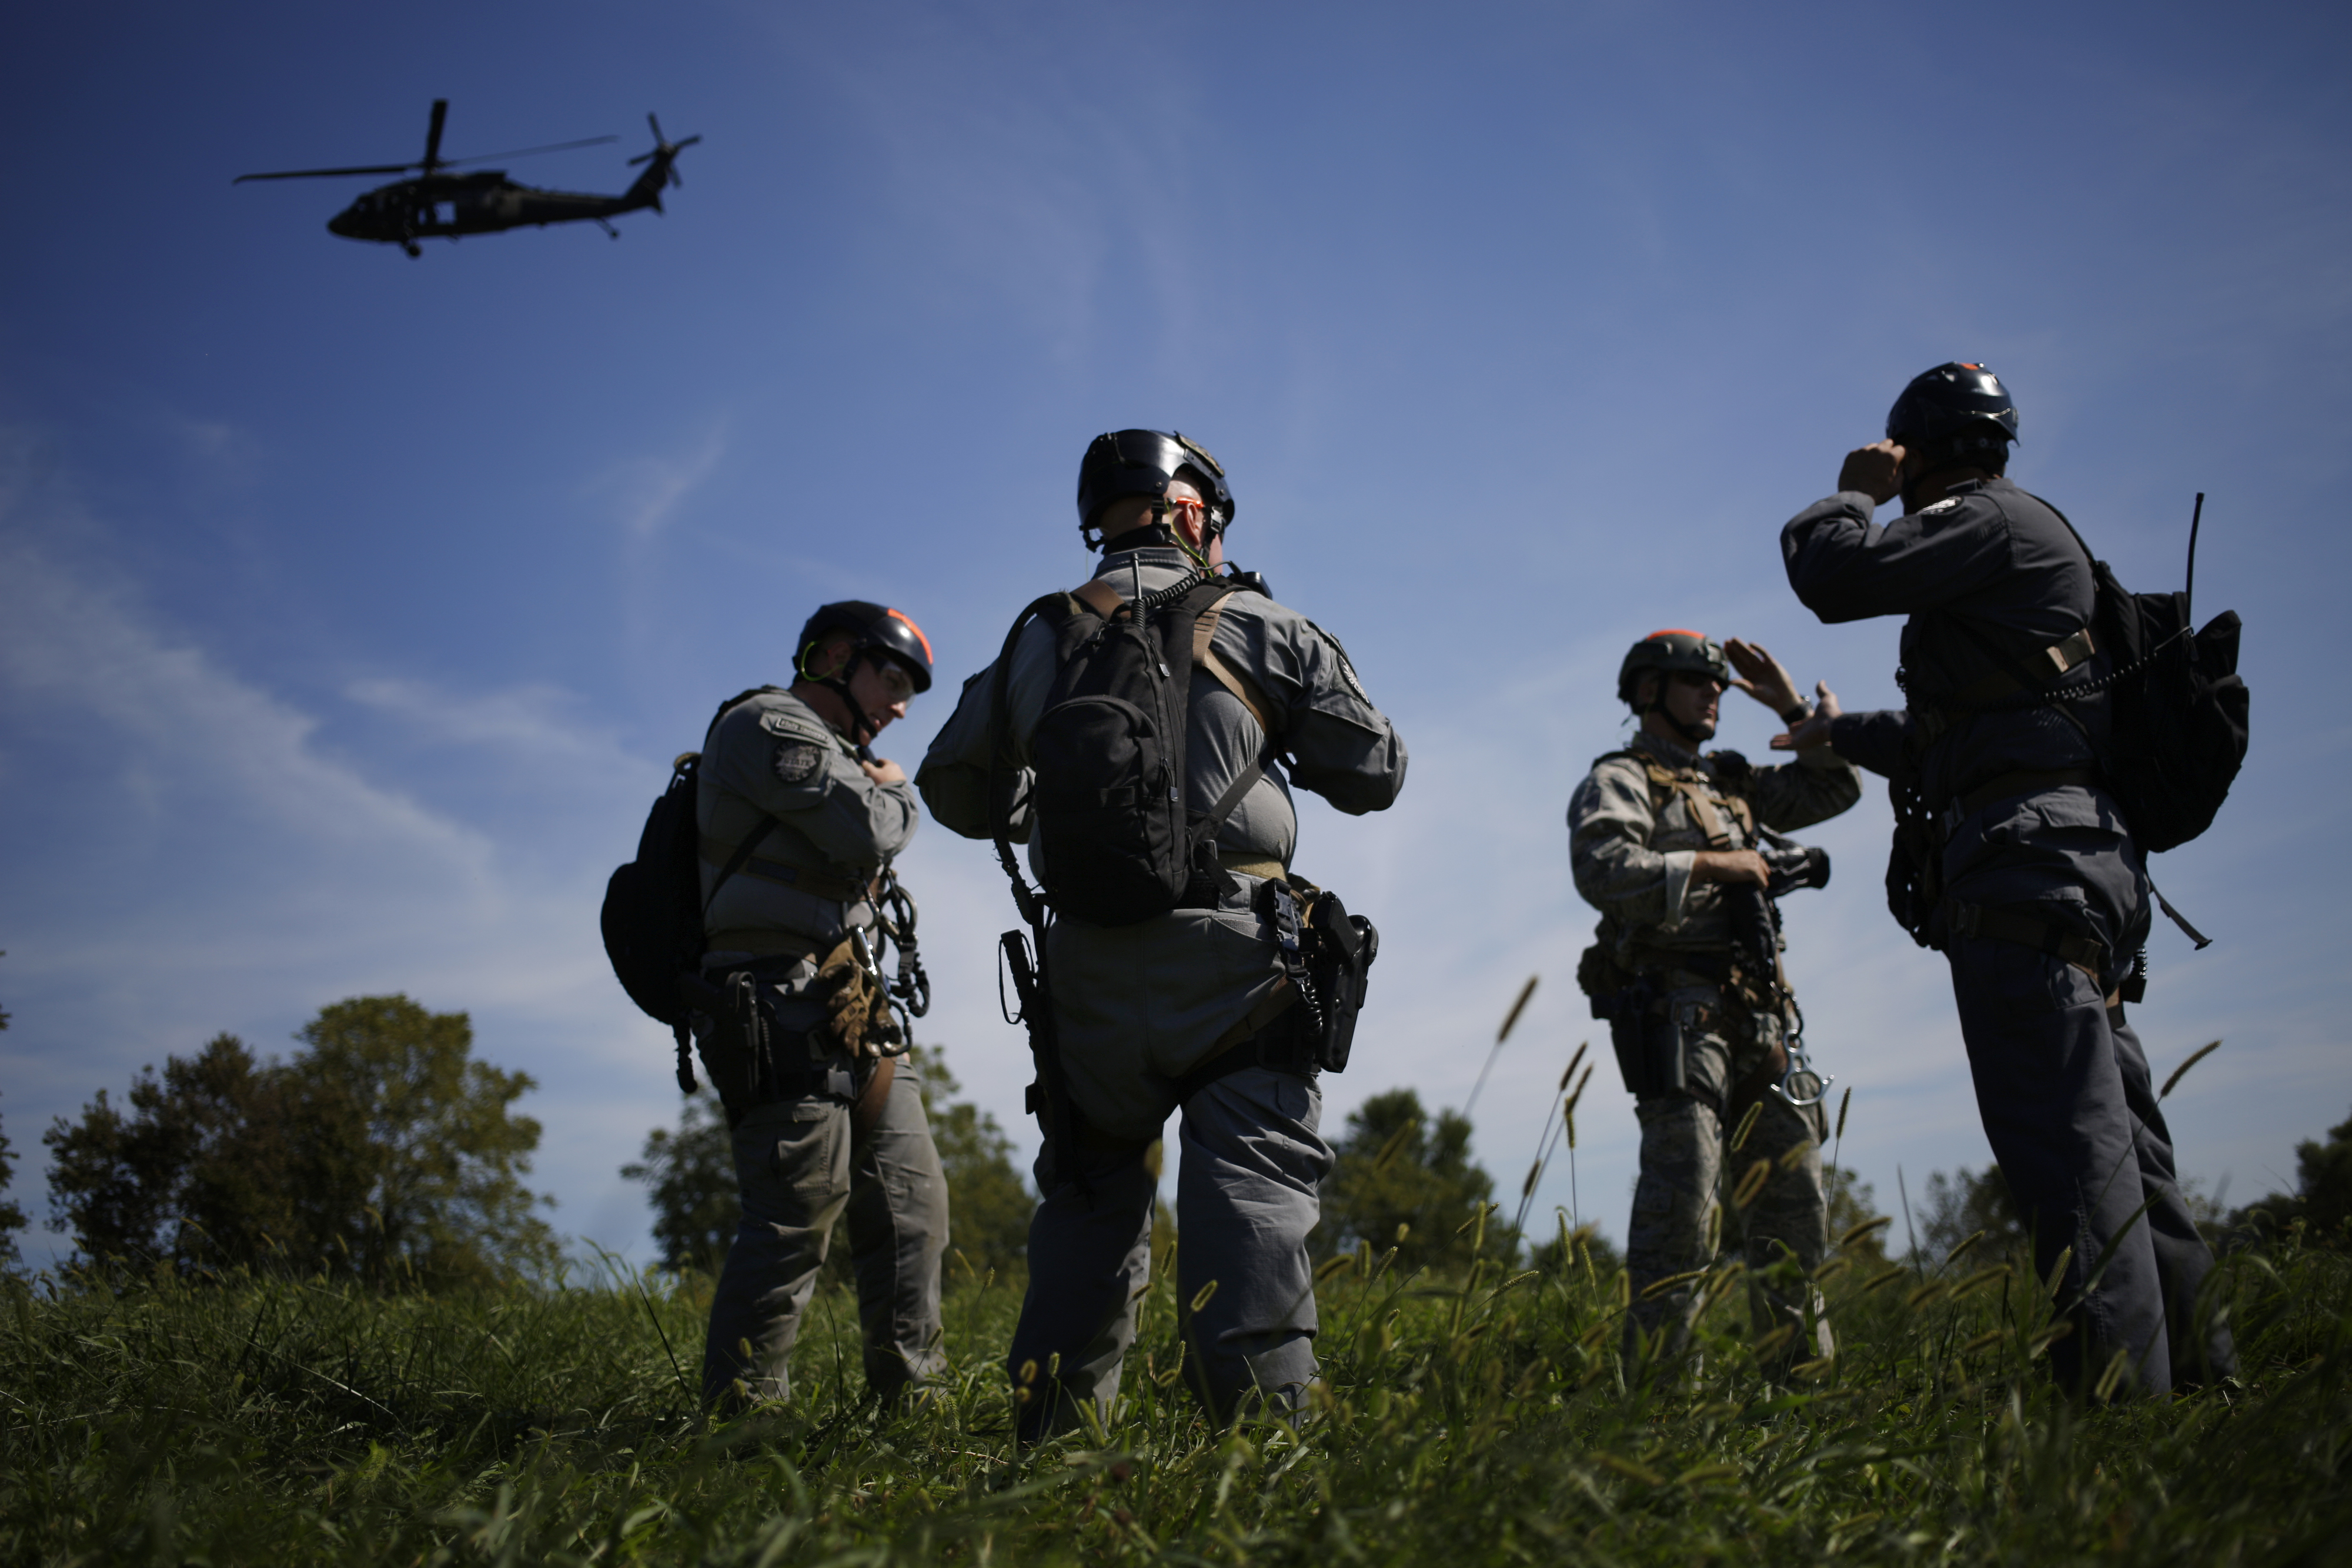 Members of the Kentucky State Police Cannabis Suppression Branch search for a patch of illegal marijuana after rappelling from a Kentucky National Guard UH-60 Blackhawk helicopter in Midway, Kentucky, U.S., on Wednesday, Sept. 14, 2016. (Luke Sharrett/Bloomberg via Getty Images)